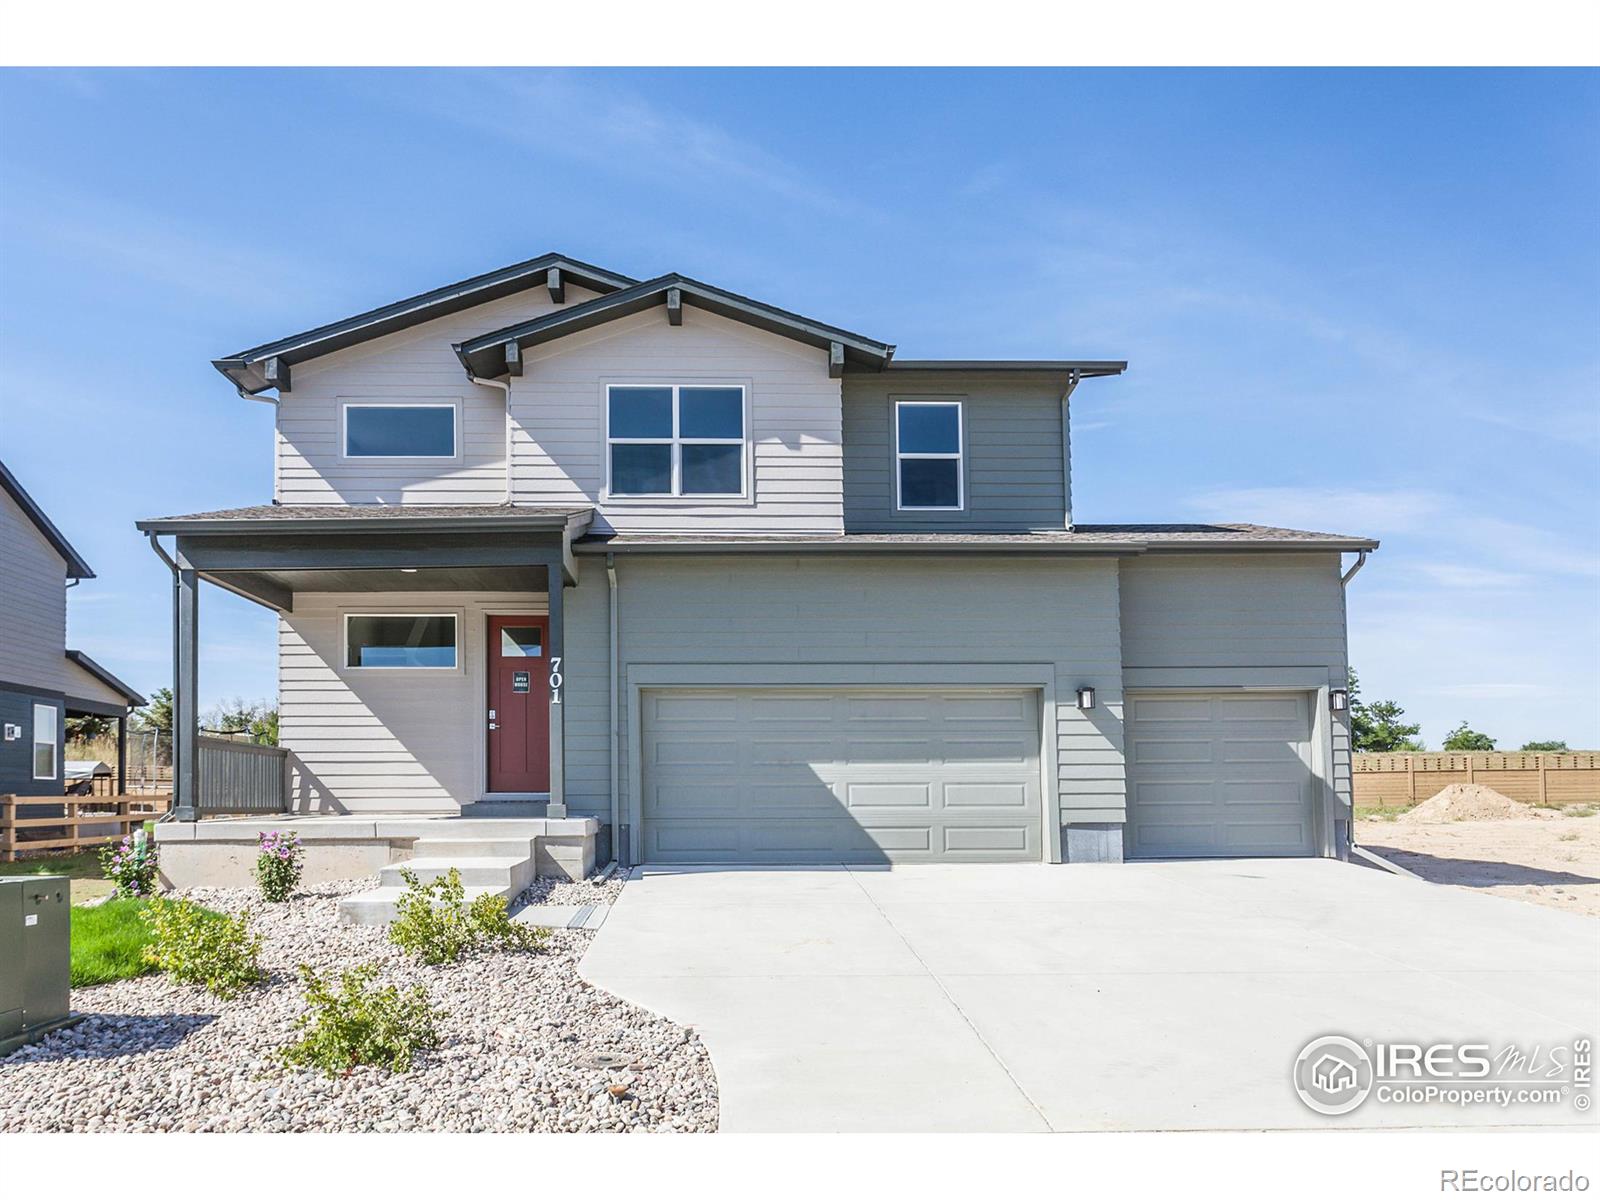 701  67th Avenue, greeley MLS: 123456789986654 Beds: 3 Baths: 3 Price: $540,160